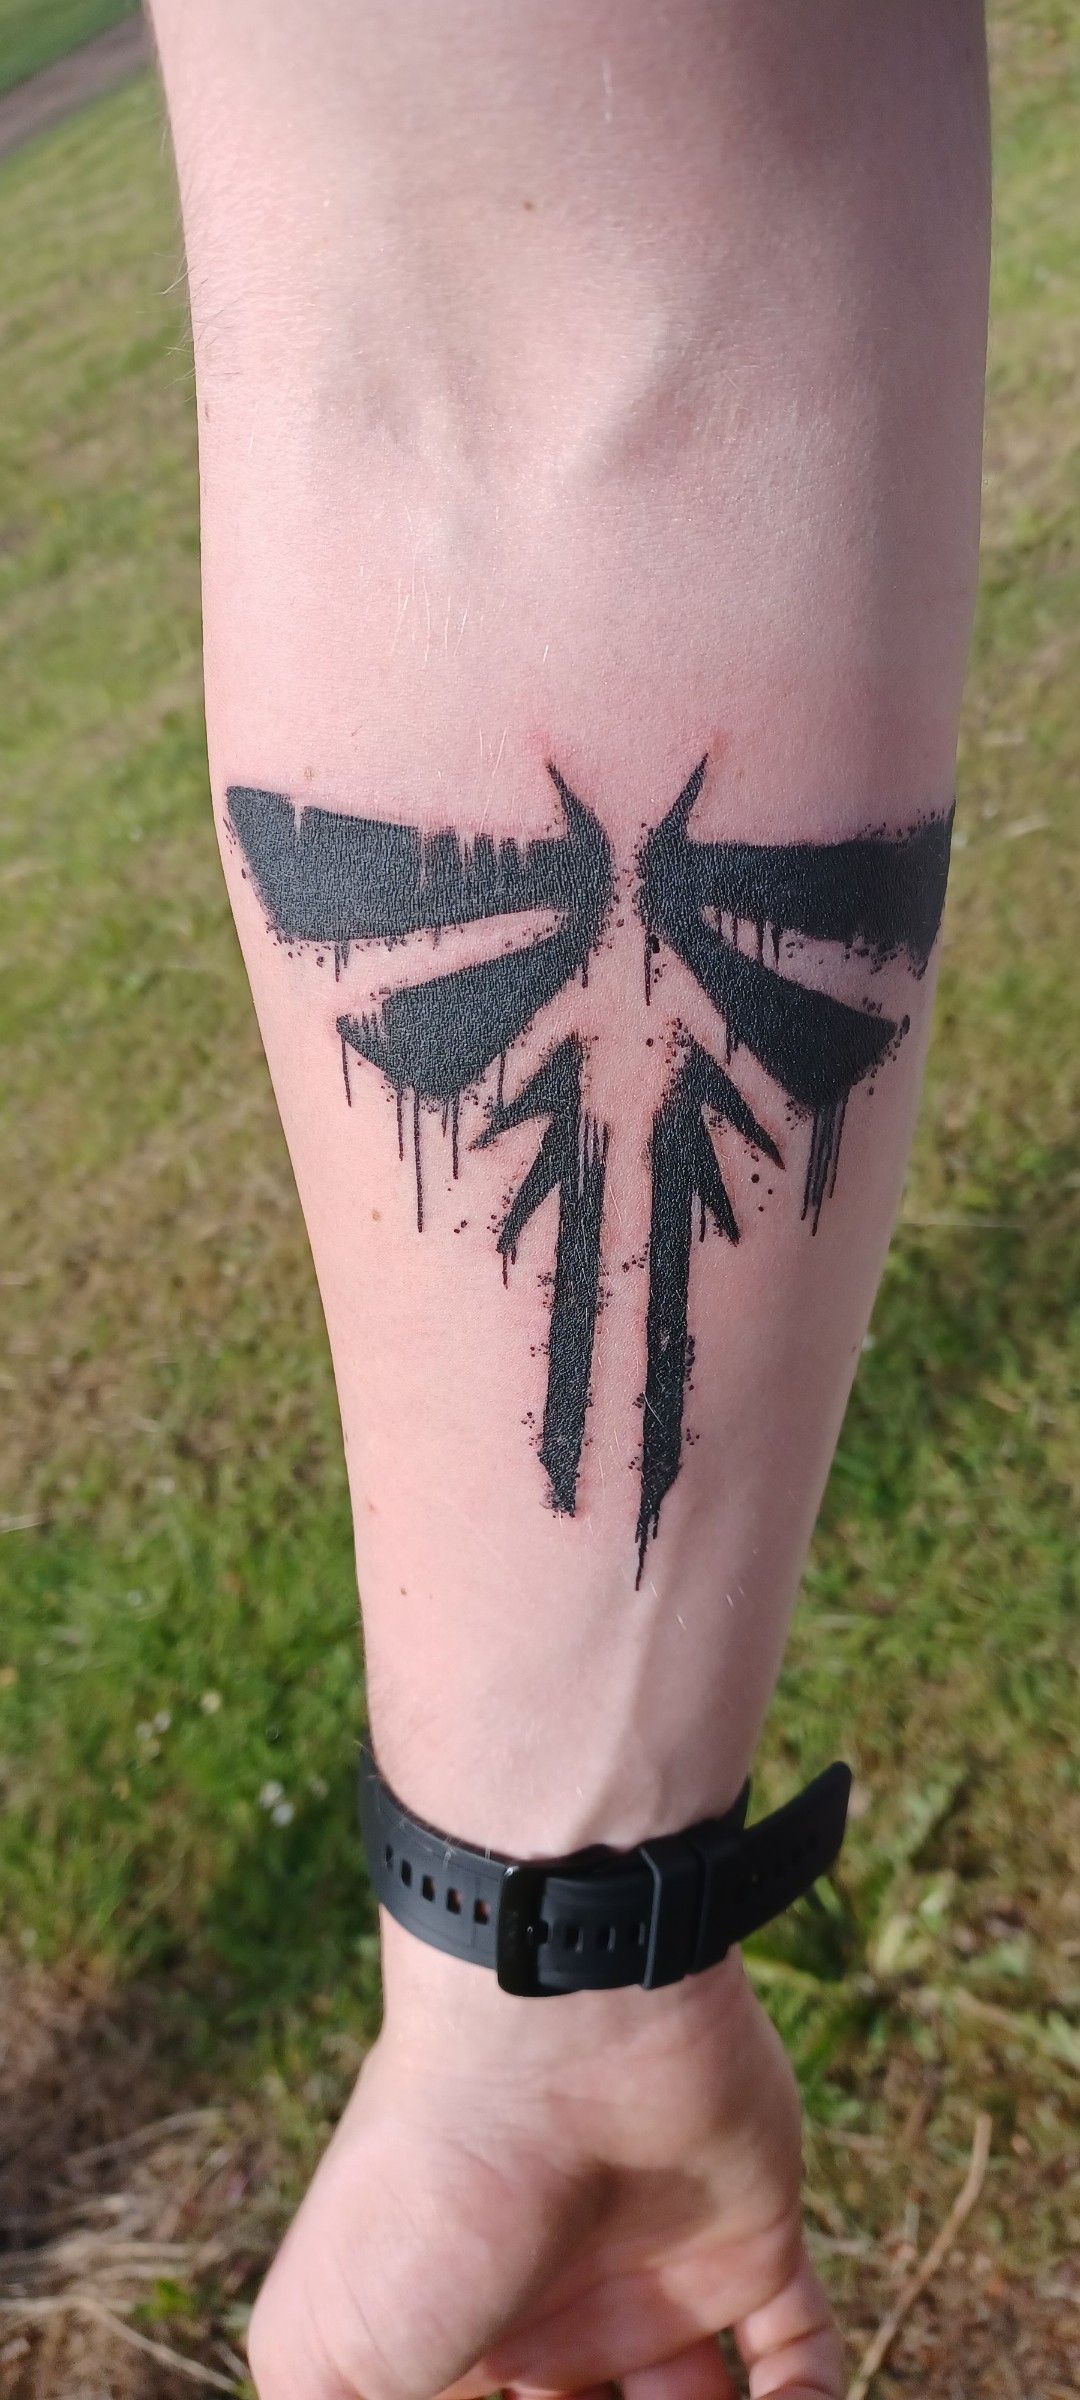 My TLOU2 tattoo! (I also have a Firefly one but you know what that